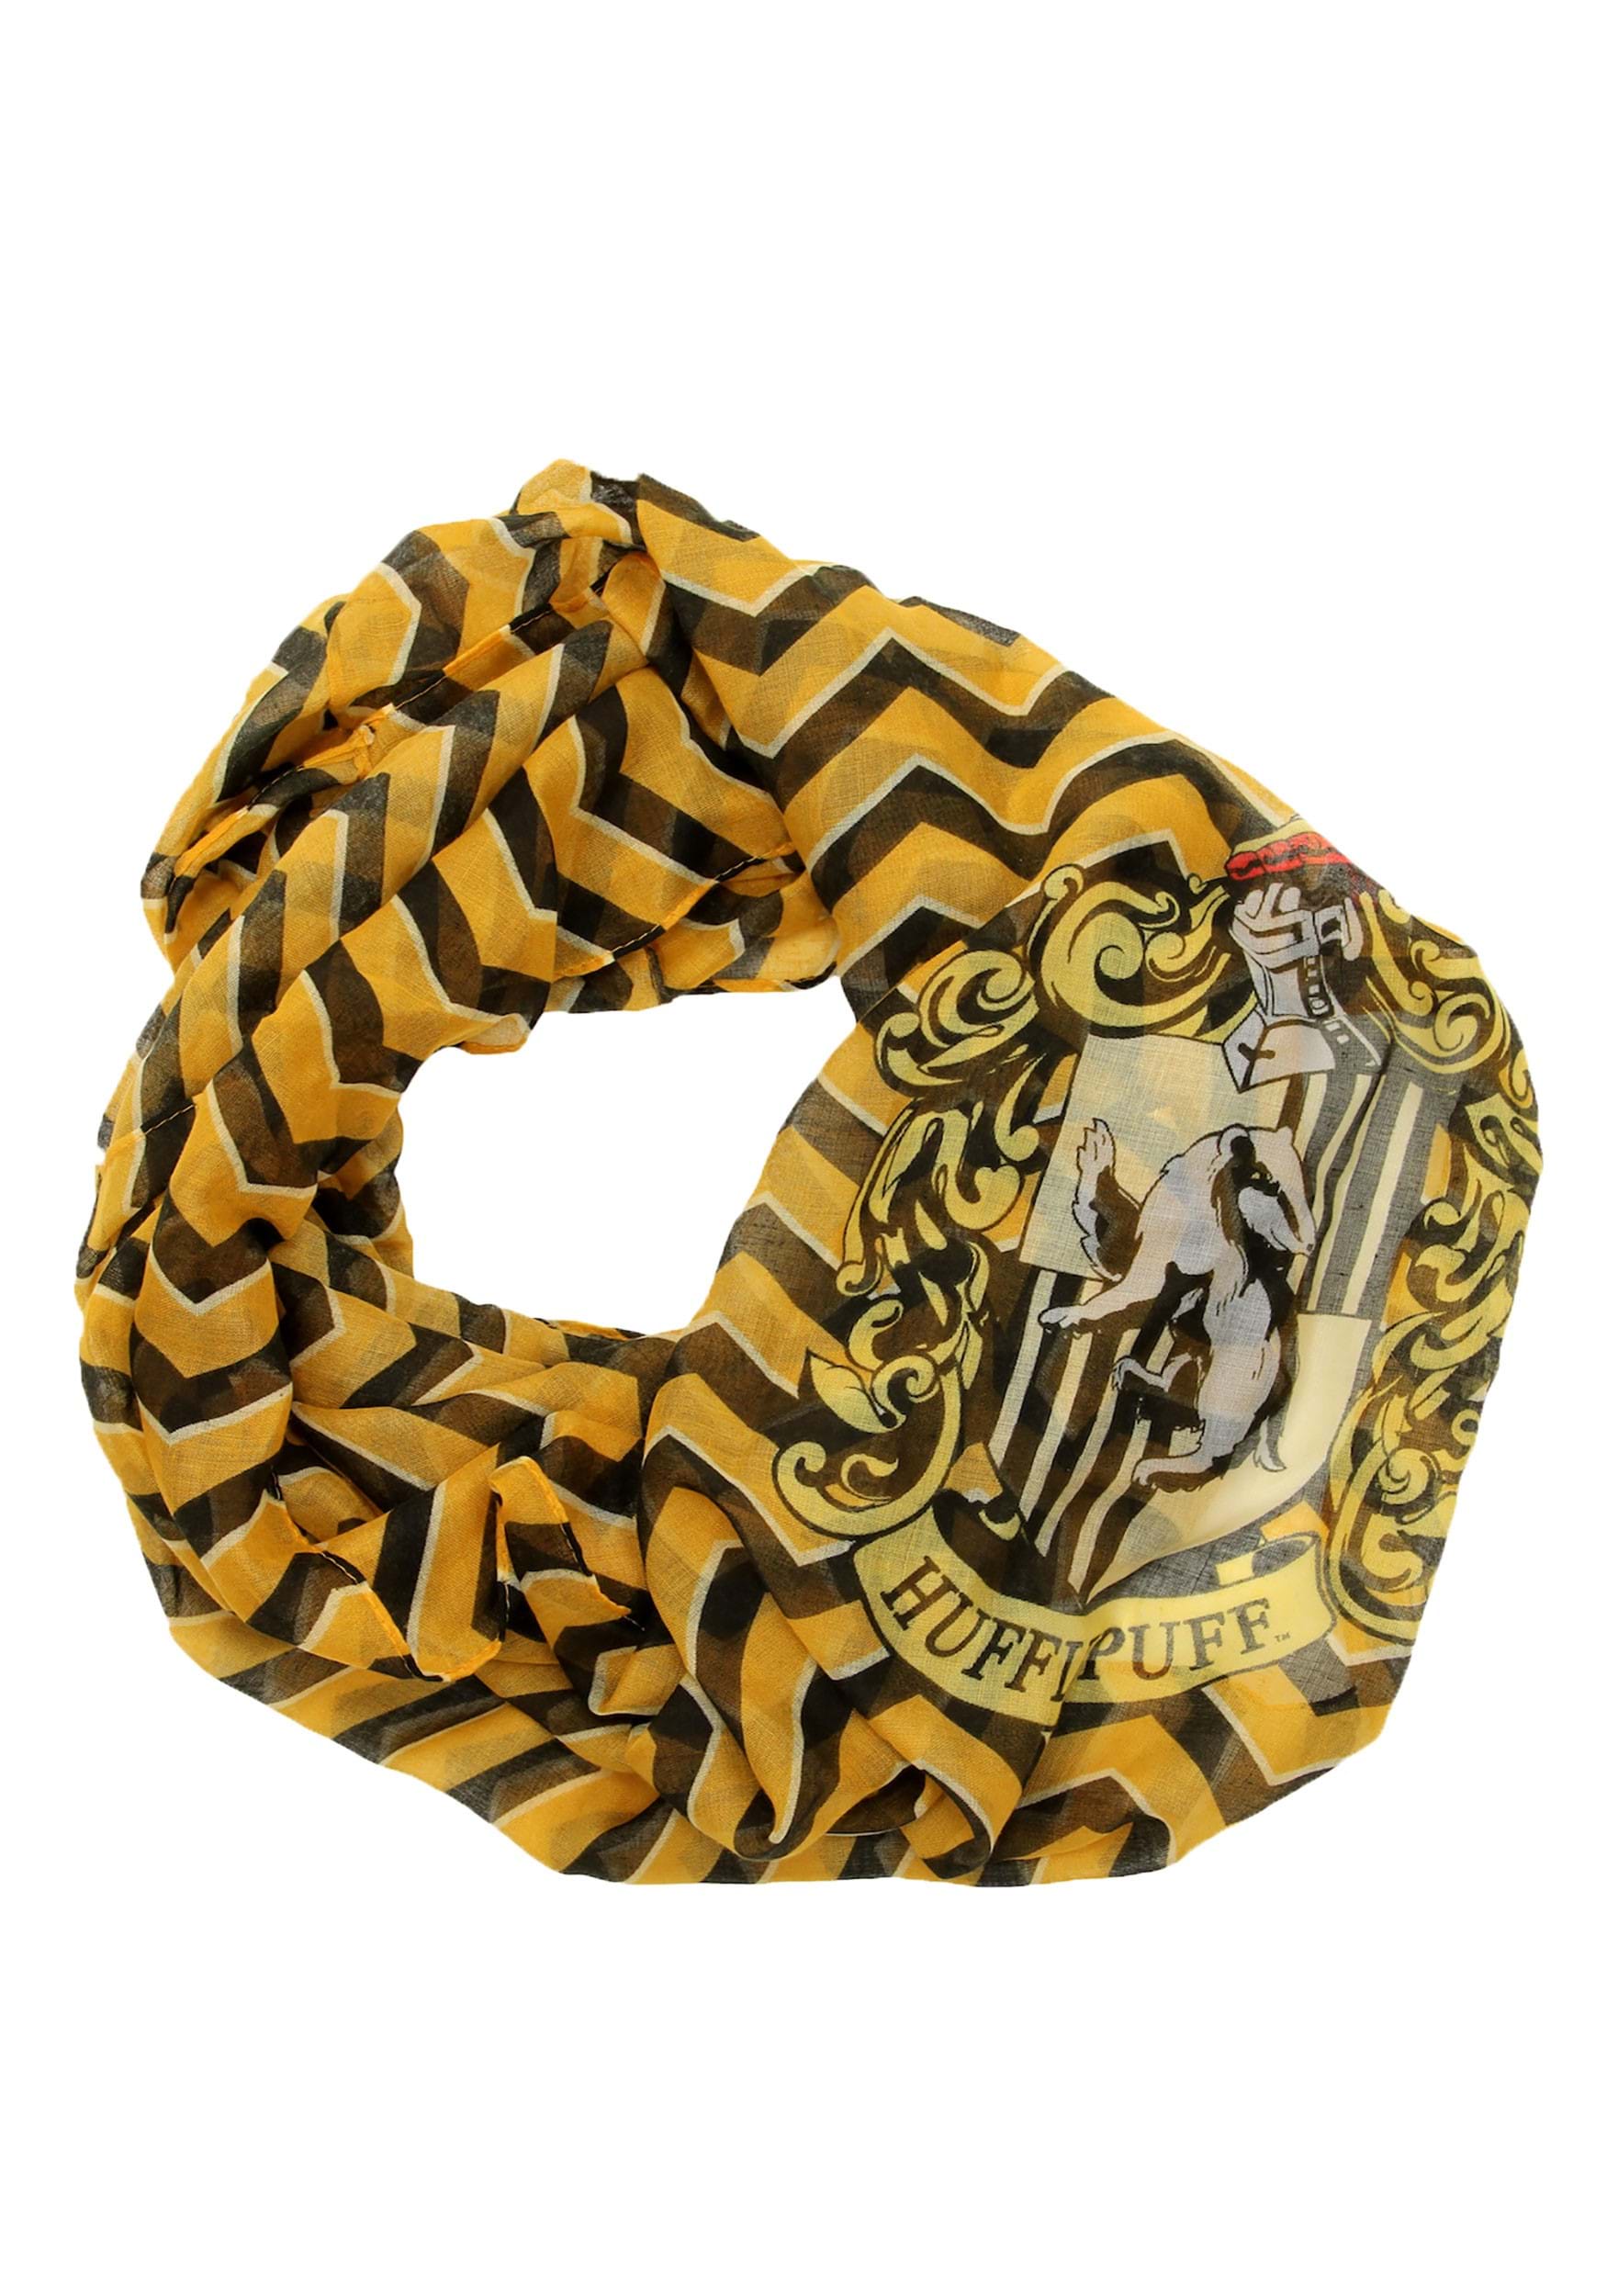 Lightweight Harry Potter Hufflepuff Crest Infinity Scarf | Harry Potter Accessories